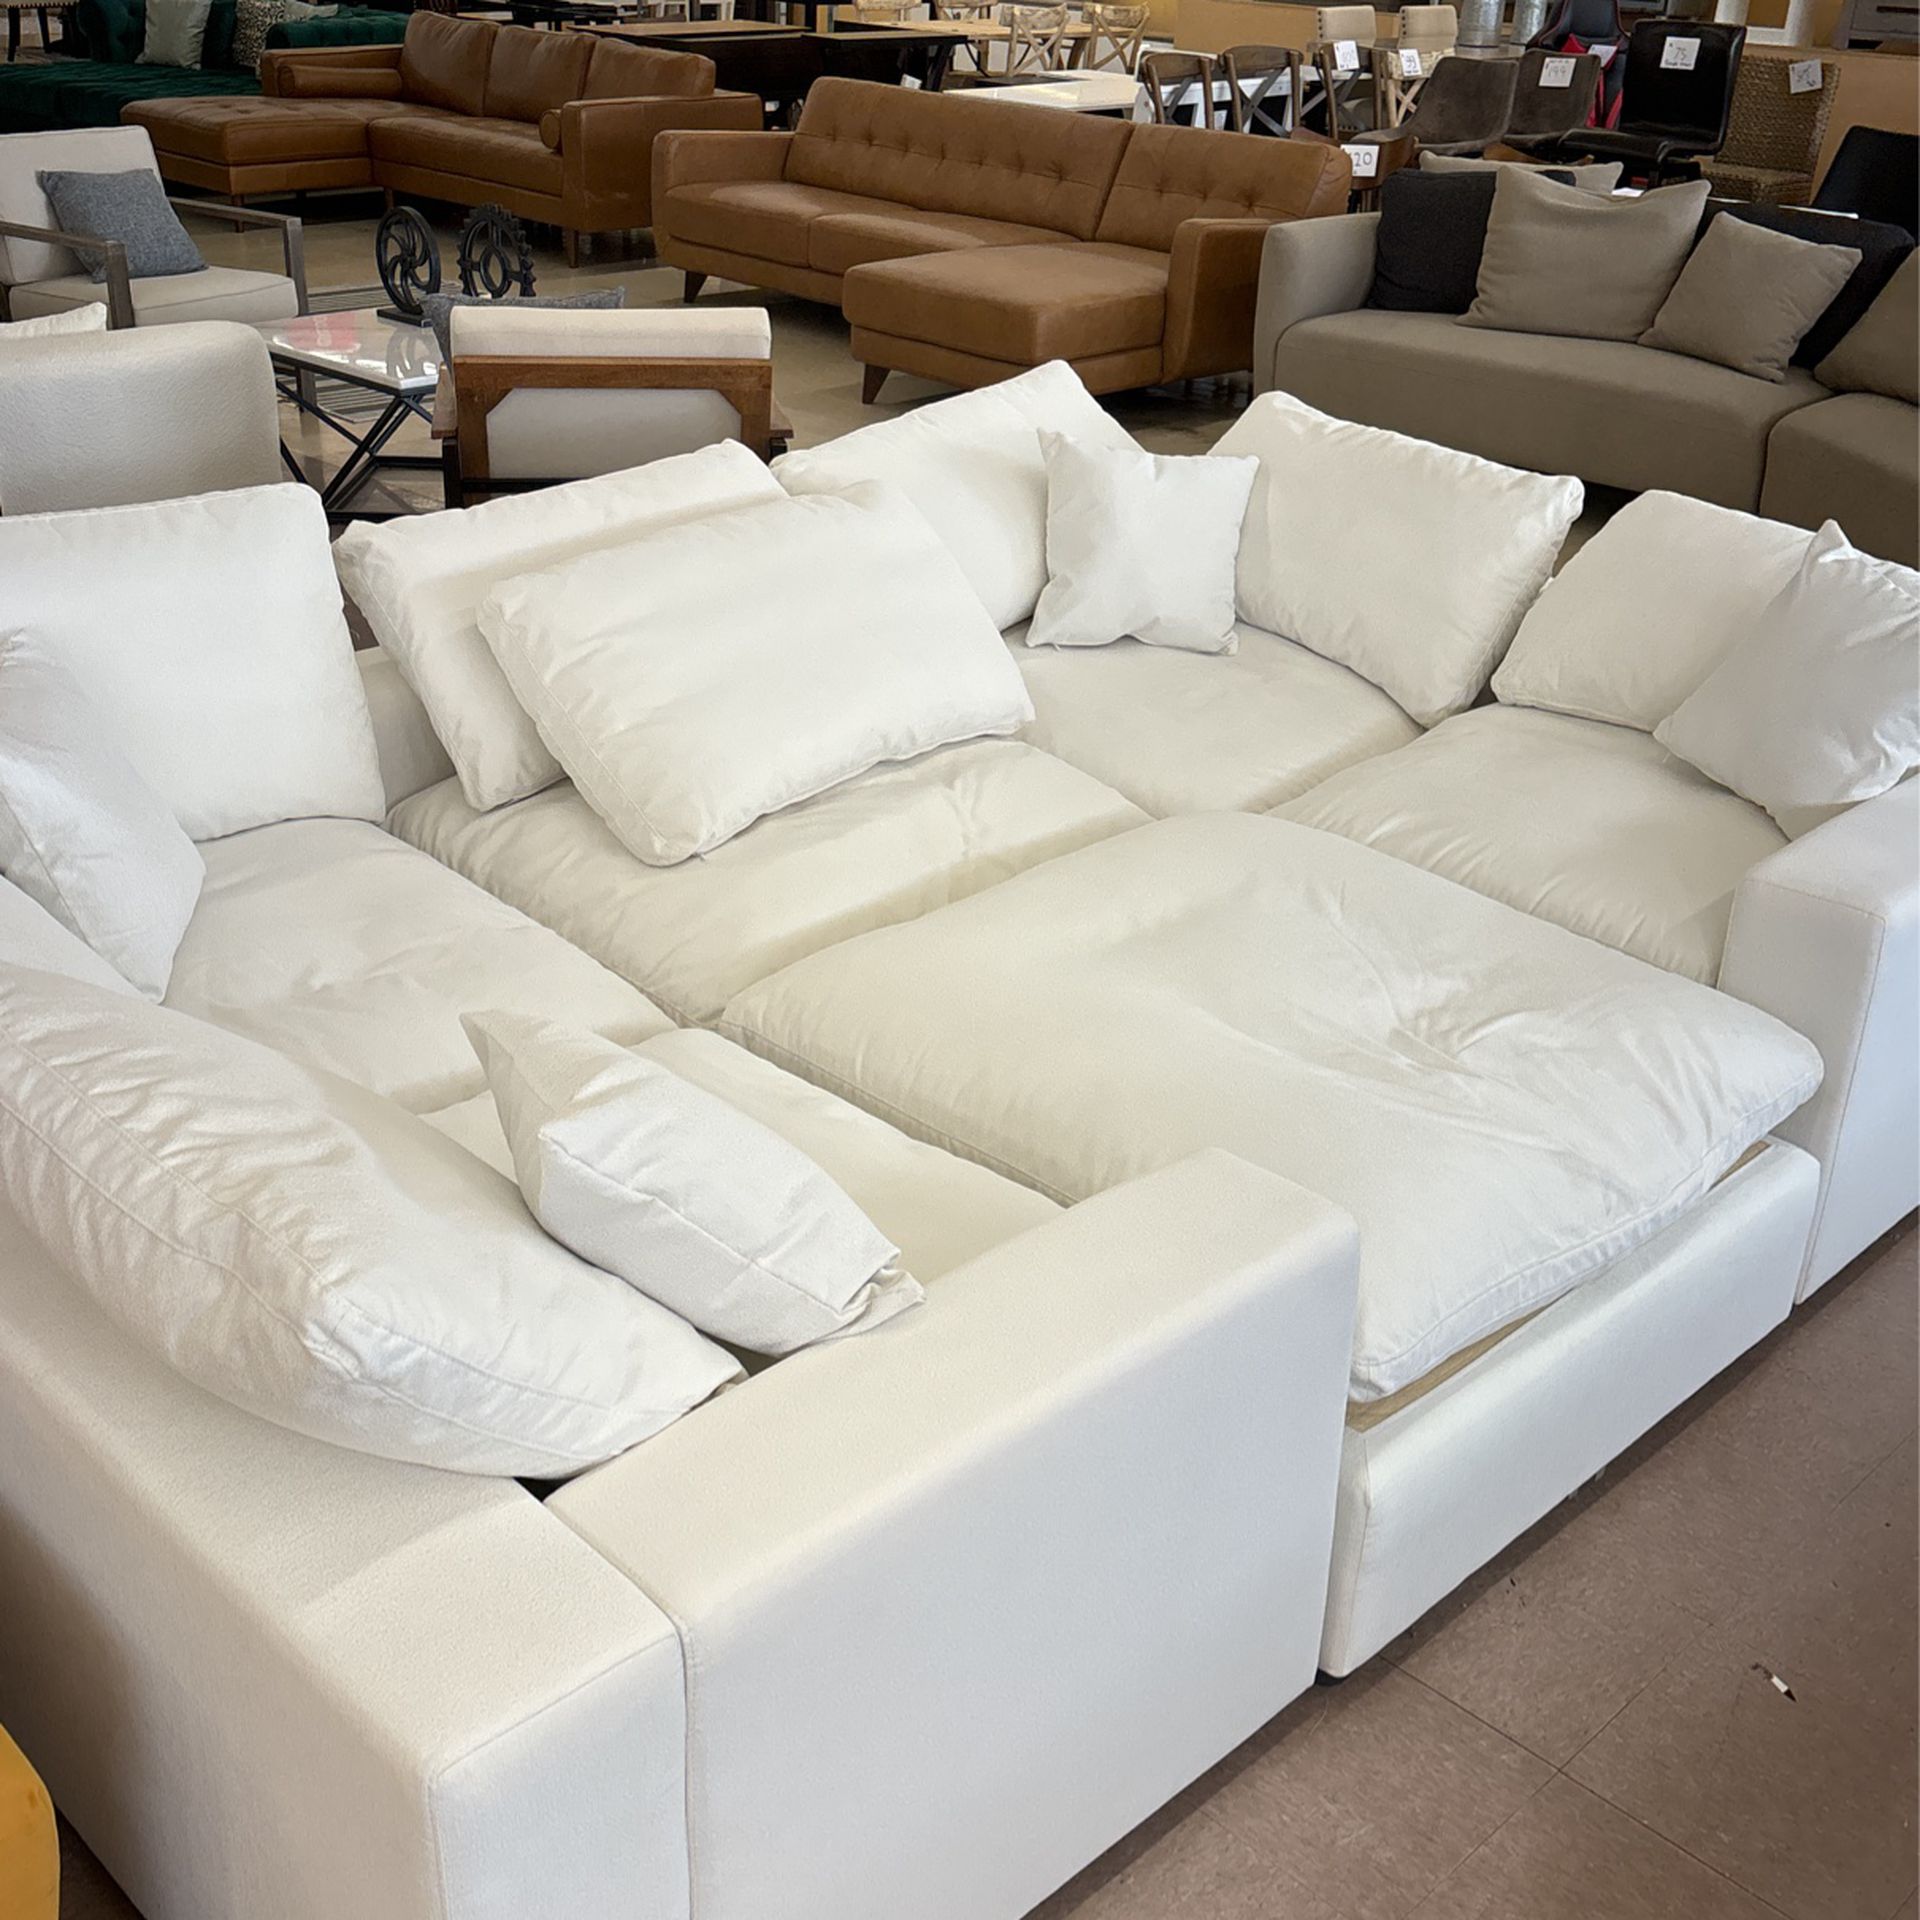 White Modern 6 Piece 🫠 Cloud Sectional Sofa Free Delivery 😍 Assembly Included 🥰🥰🥰 Finance Available🌸🥳😍🫠❤️🥰